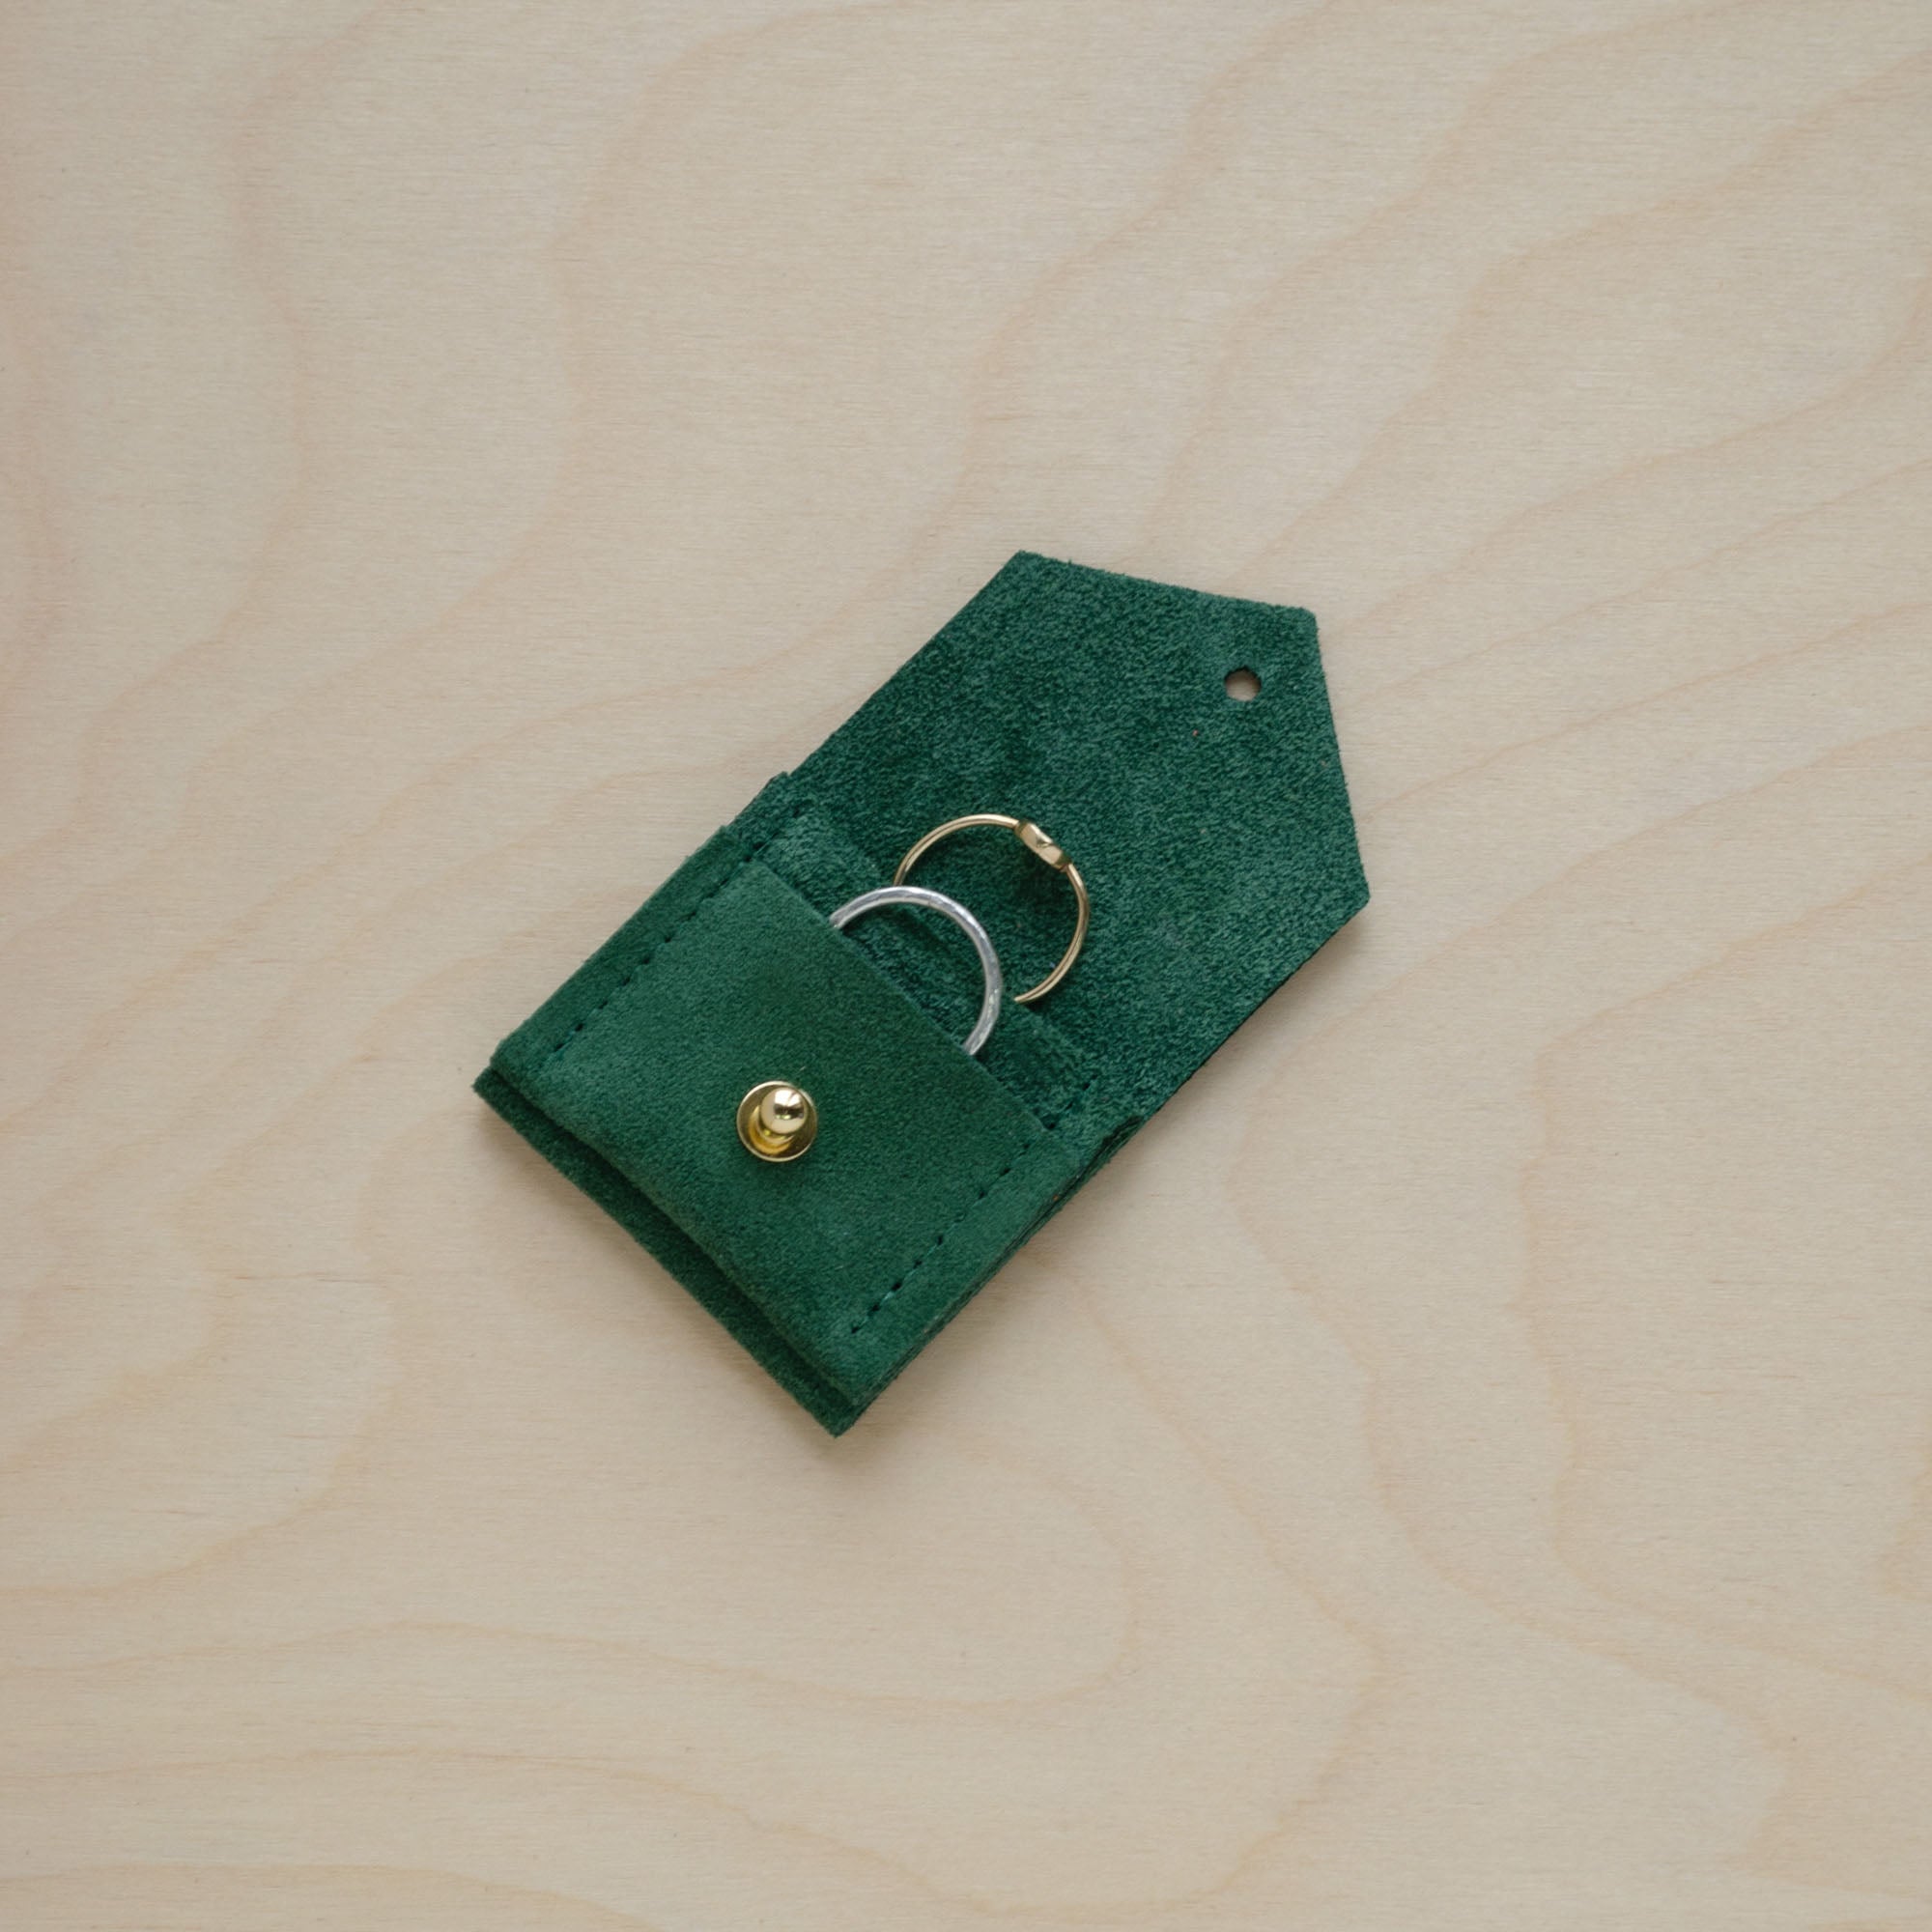 An open and in use, Moss Green Wedding Ring Pouch in suede.